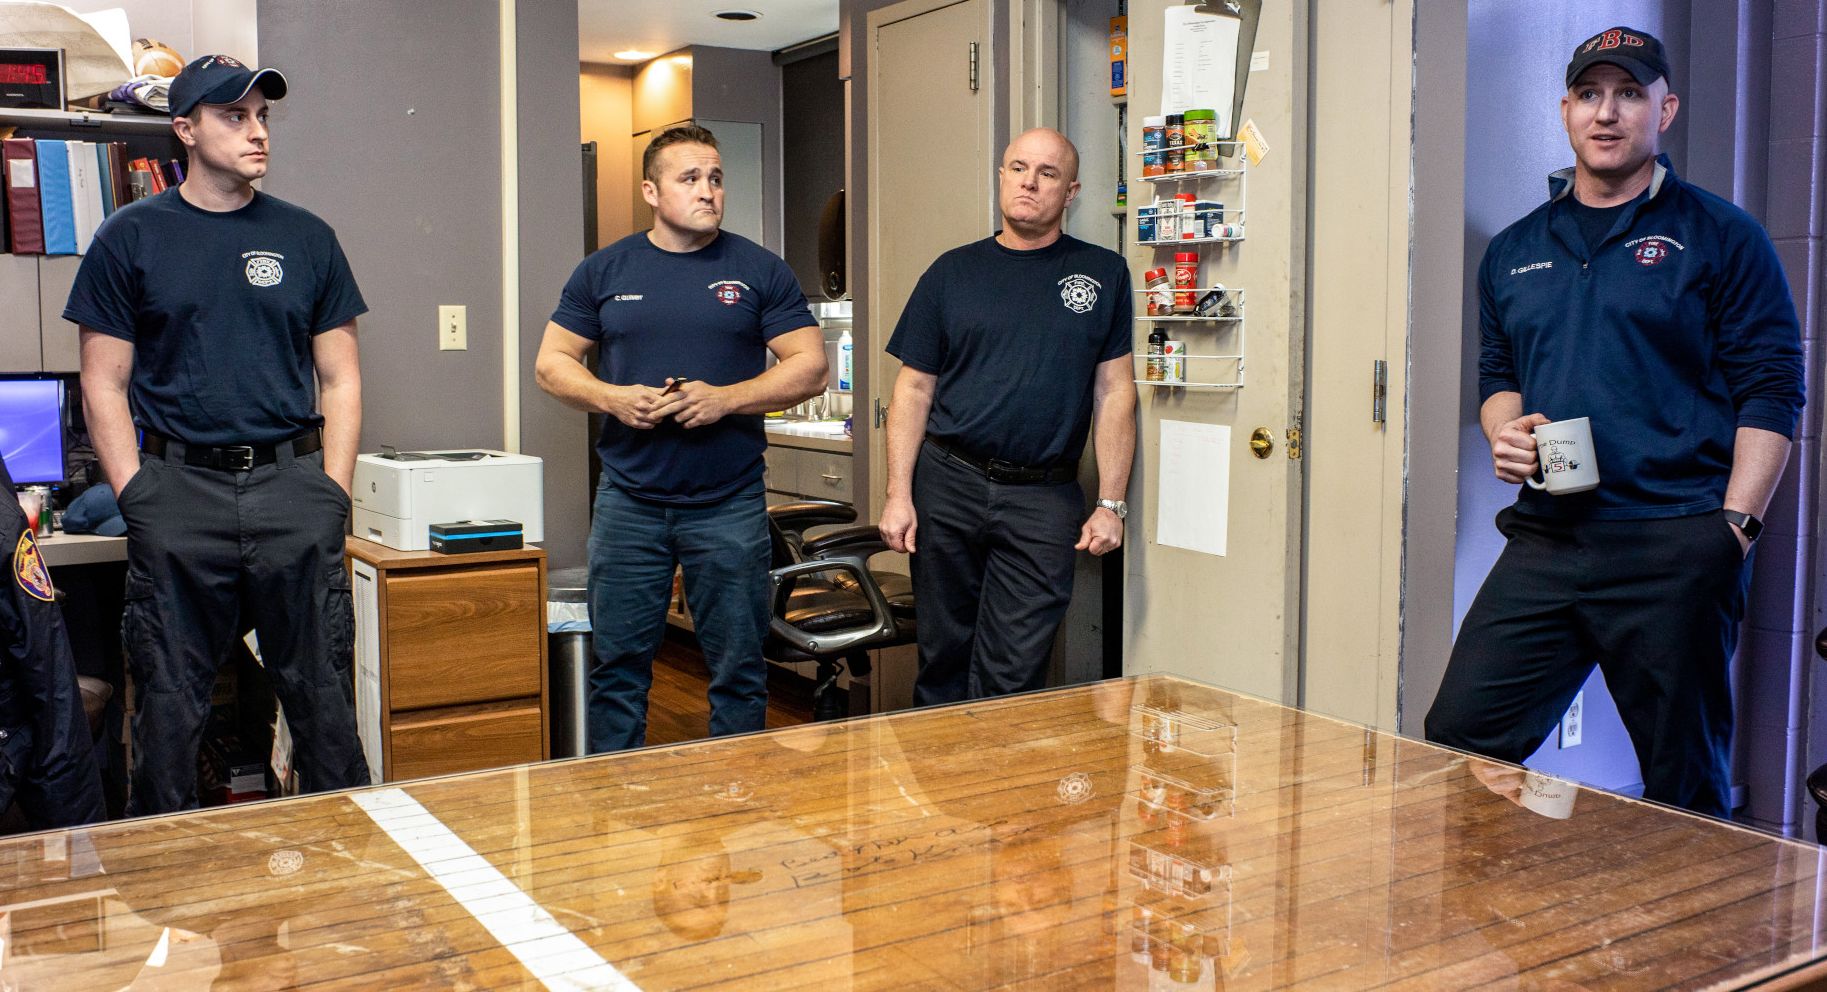 Firefighters stand around their station's new table made from a section of basketball court